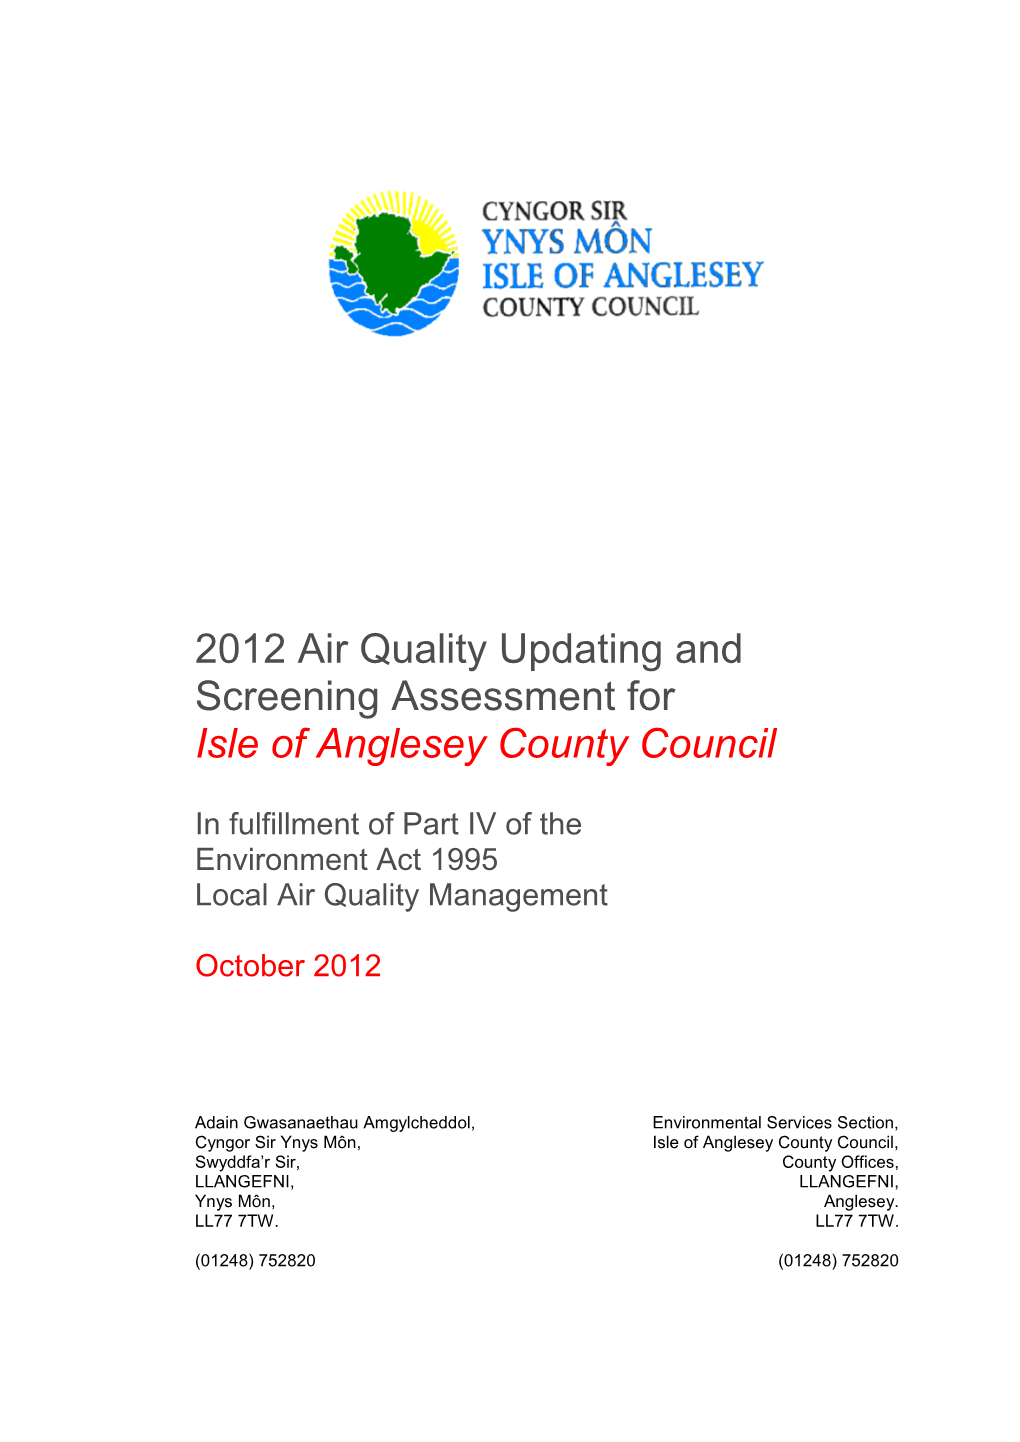 Air Quality Updating and Screening Assessment for Isle of Anglesey County Council